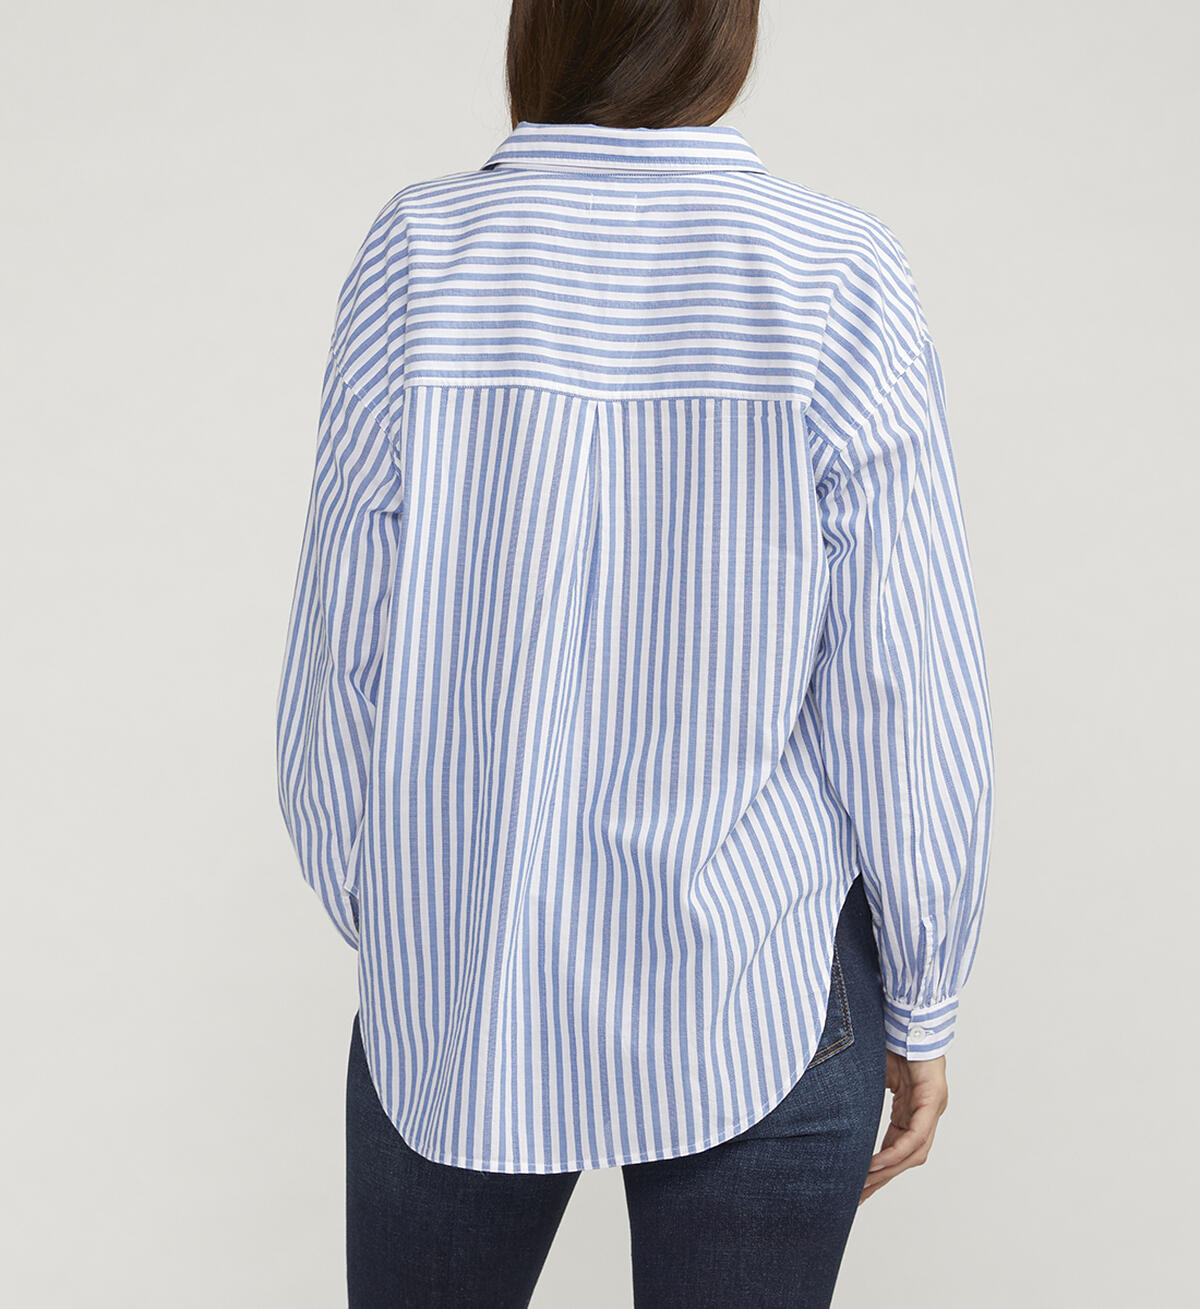 Relaxed Button-Down Shirt, , hi-res image number 1